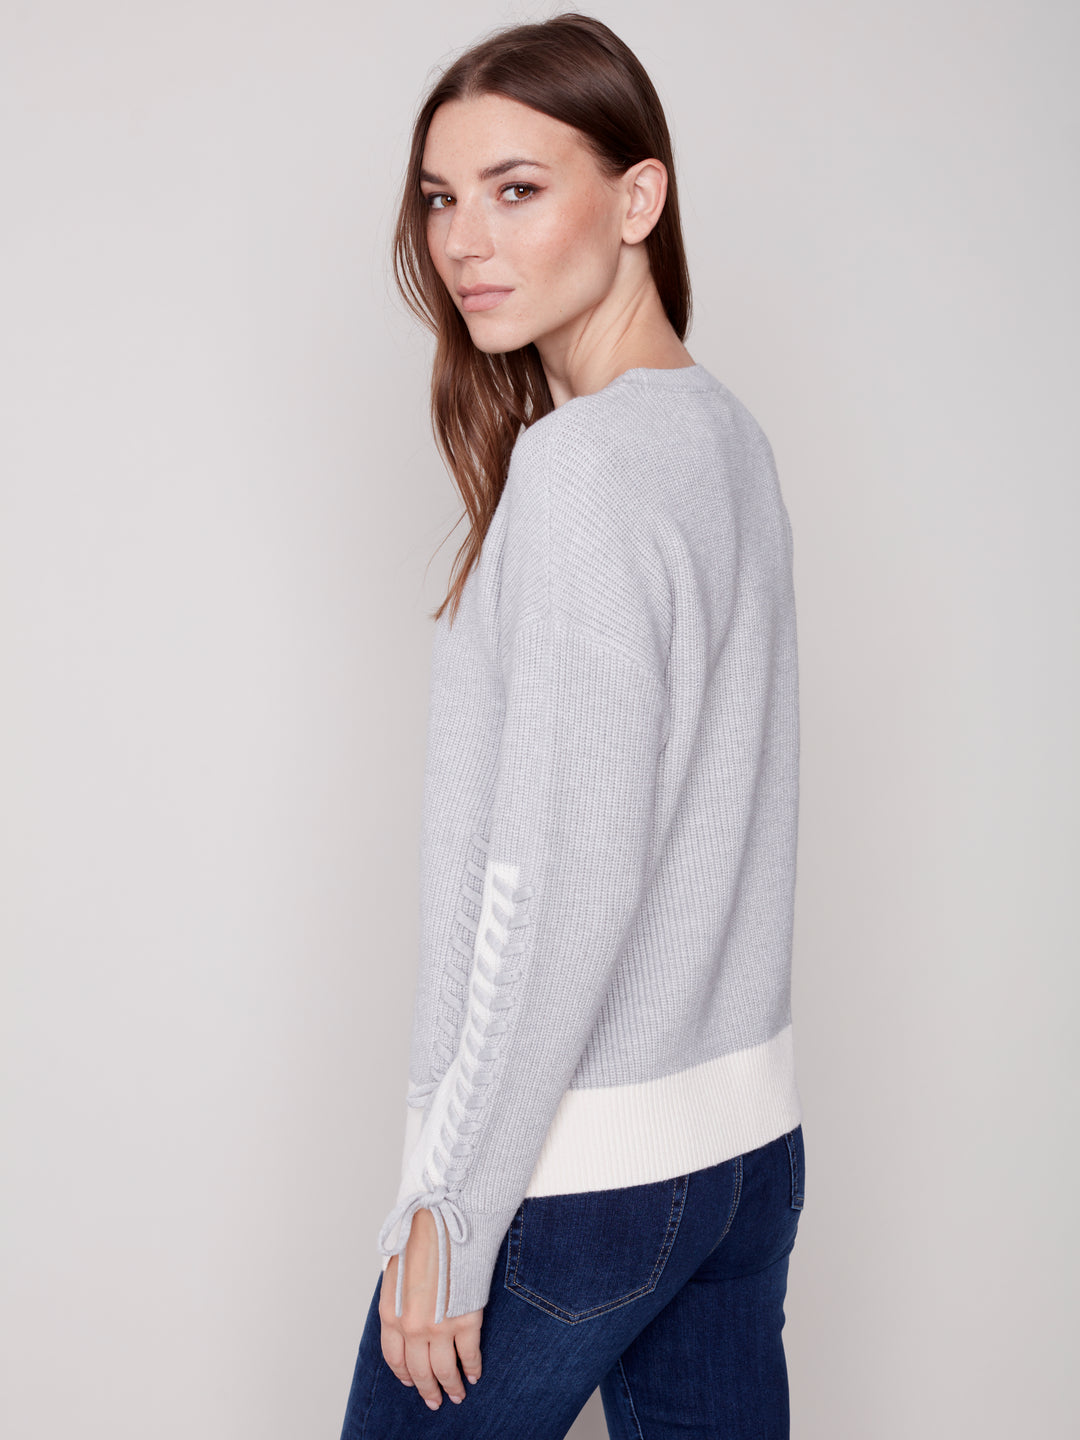 Jacquard Knit Top With Side Tie